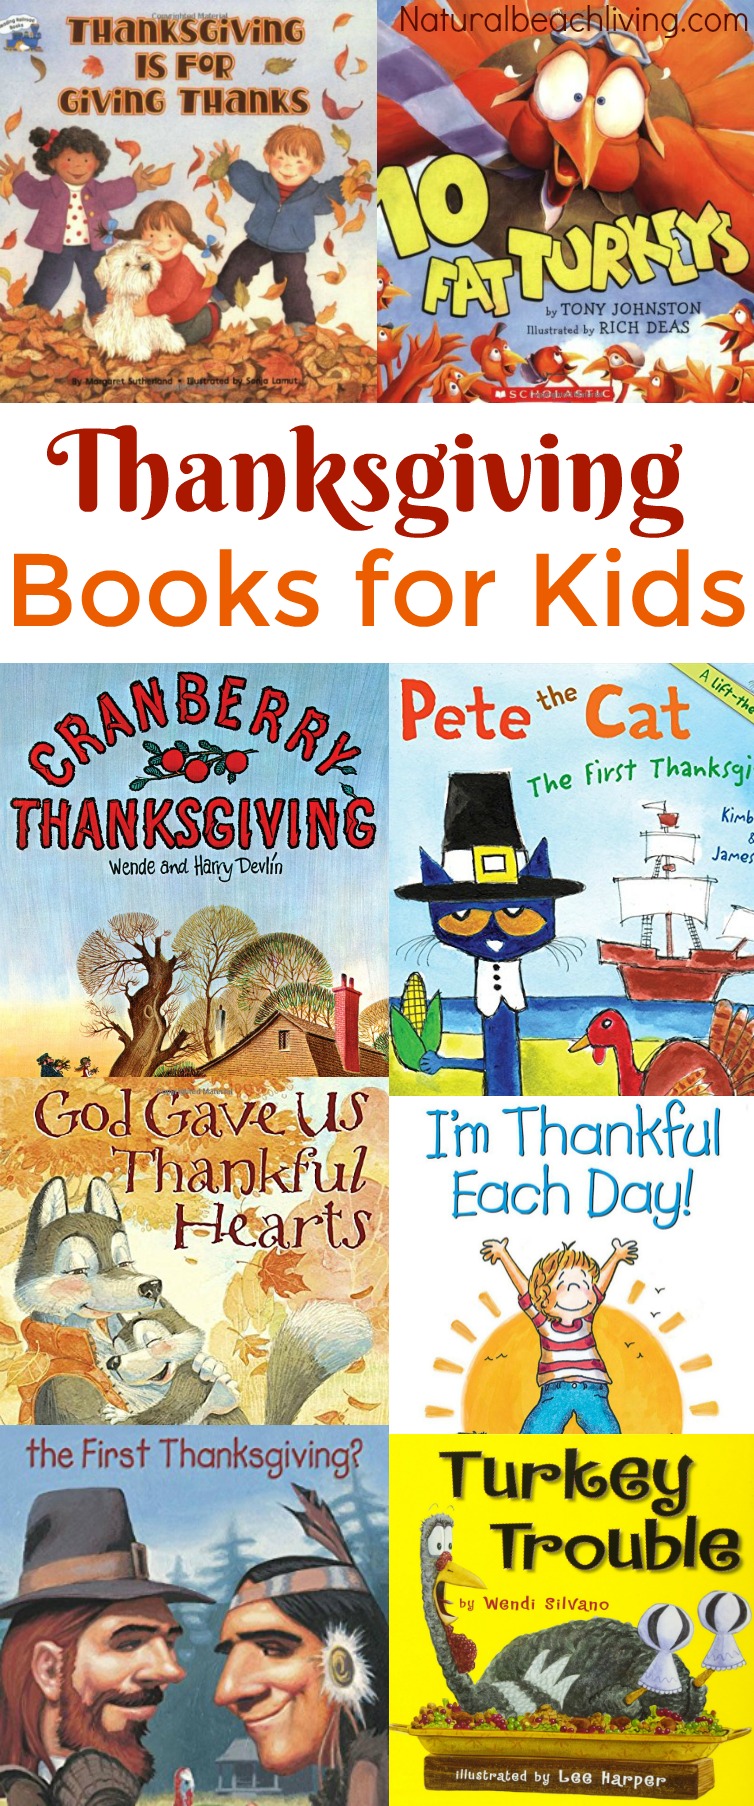 25+ Preschool Thanksgiving Activities and Thanksgiving Preschool Theme Ideas. Thanksgiving preschool activities for home and a classroom, Turkey Crafts, Thankful crafts, Thanksgiving Printables, Thanksgiving Books and More.